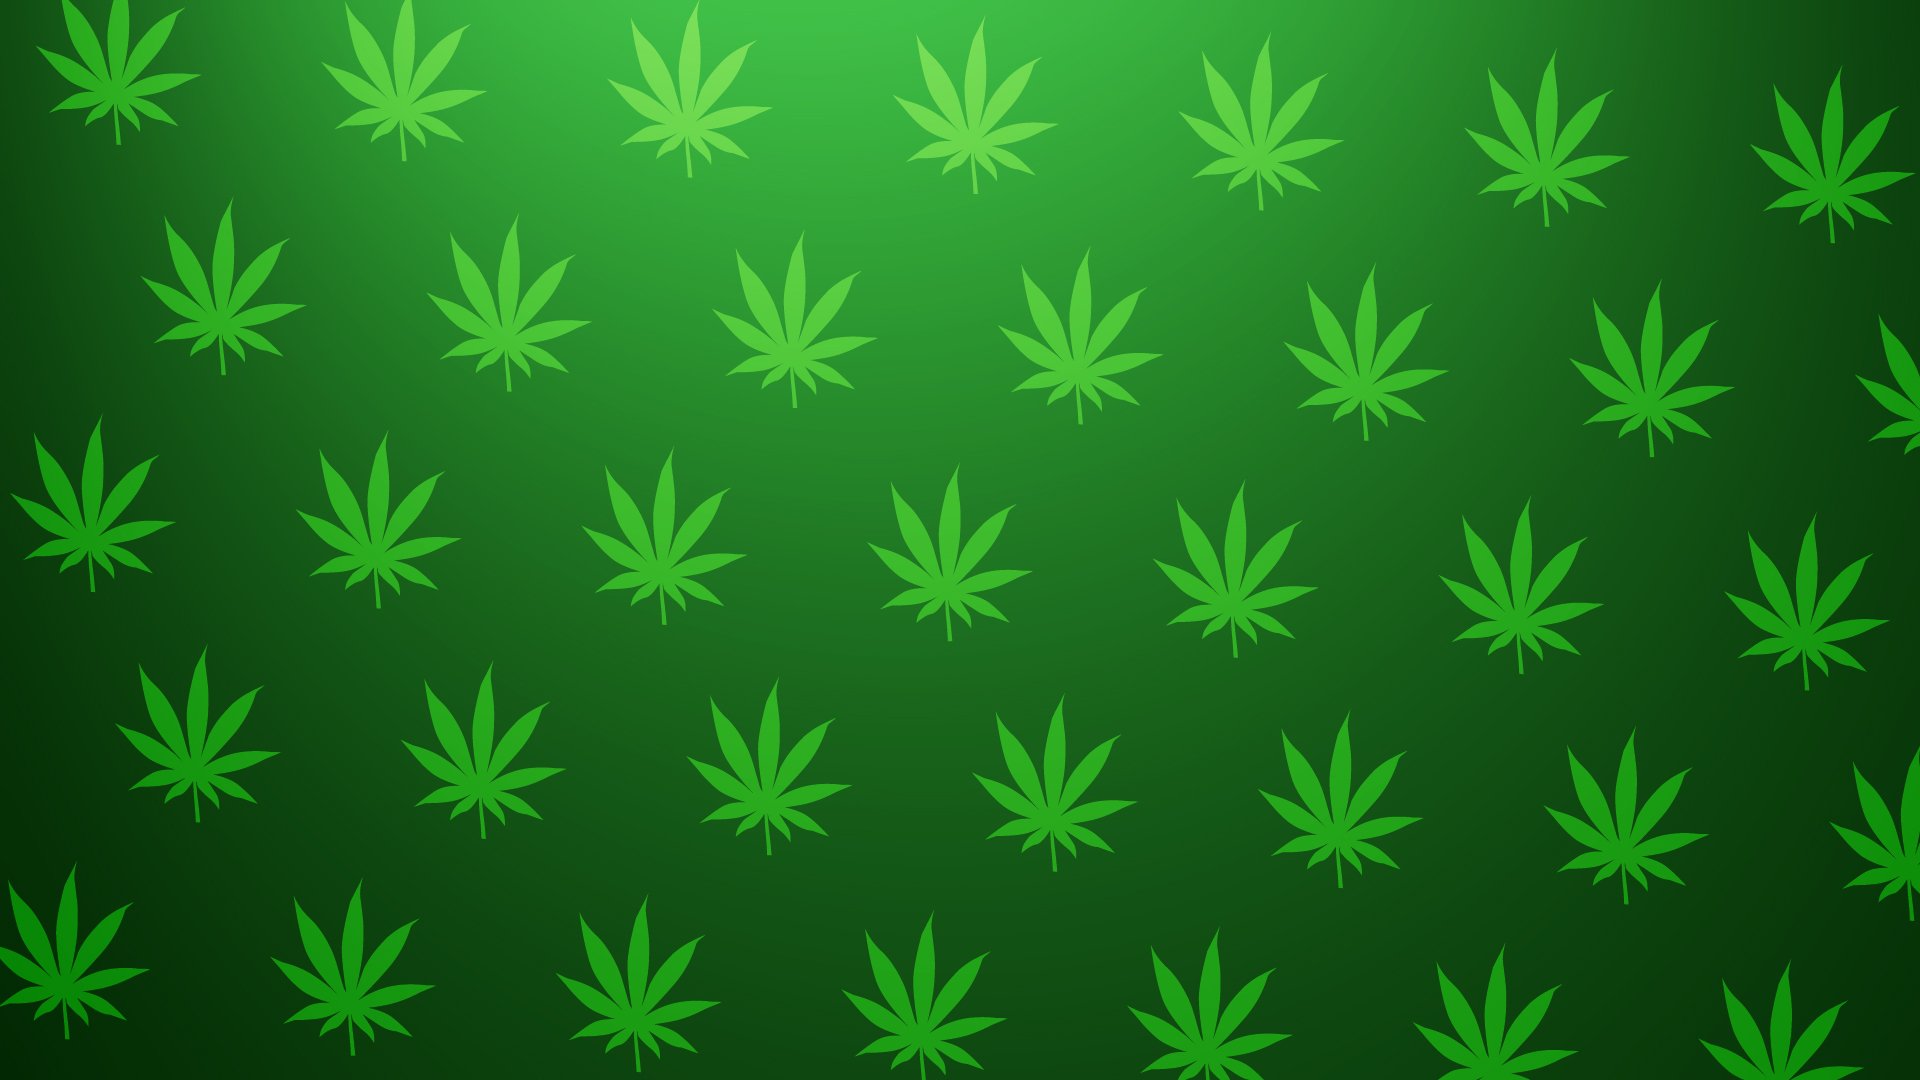 Weed background wallpaper background